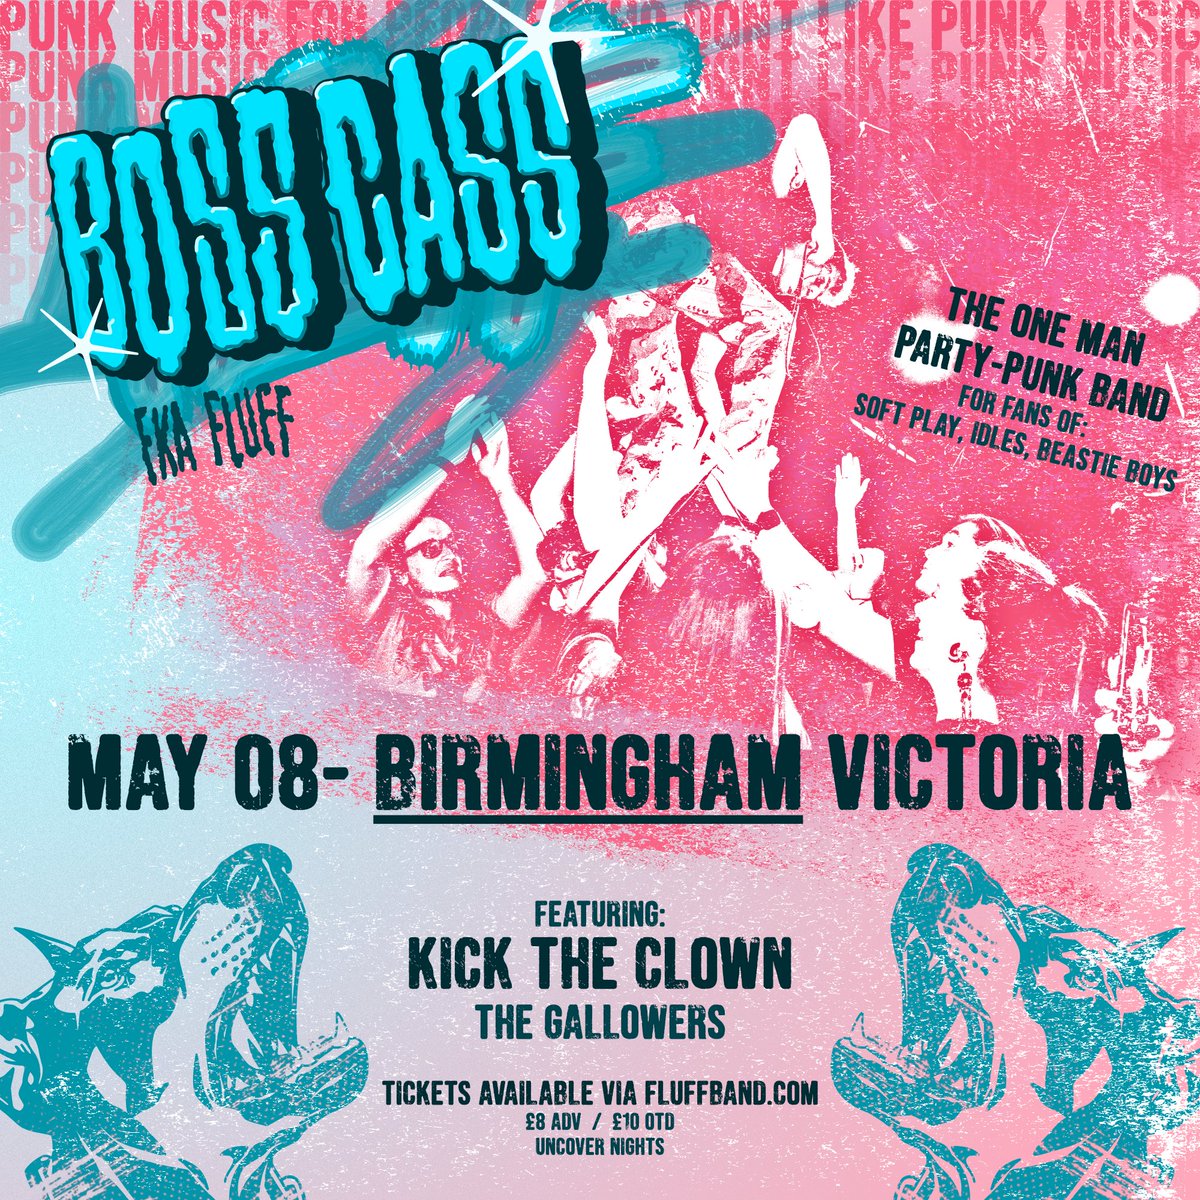 LINE UP ANNOUNCEMENT 💙 The Gallowers are set to join one-man punk band @bosscassuk when they headline @TheVictoria, Birmingham, on Wednesday, 8th May, with Kick The Clown 💥 Tickets on sale now: bit.ly/49PZc8A